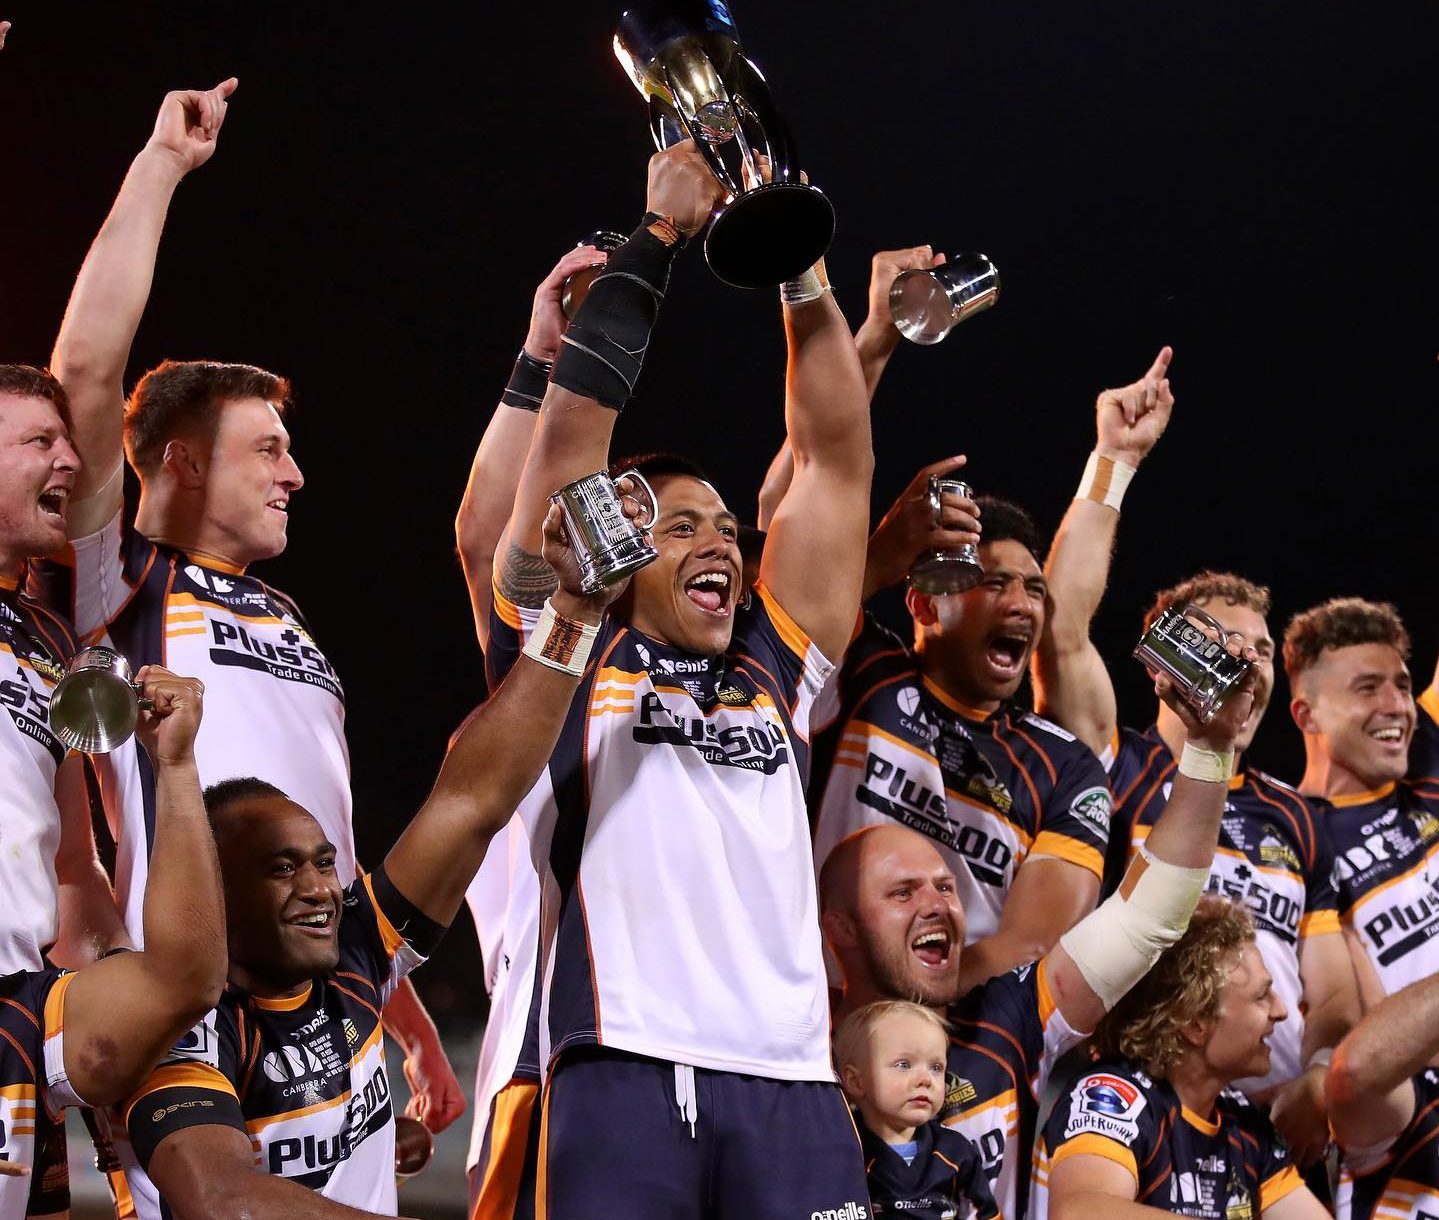 Brumbies win third Super Rugby title in nail biting home final